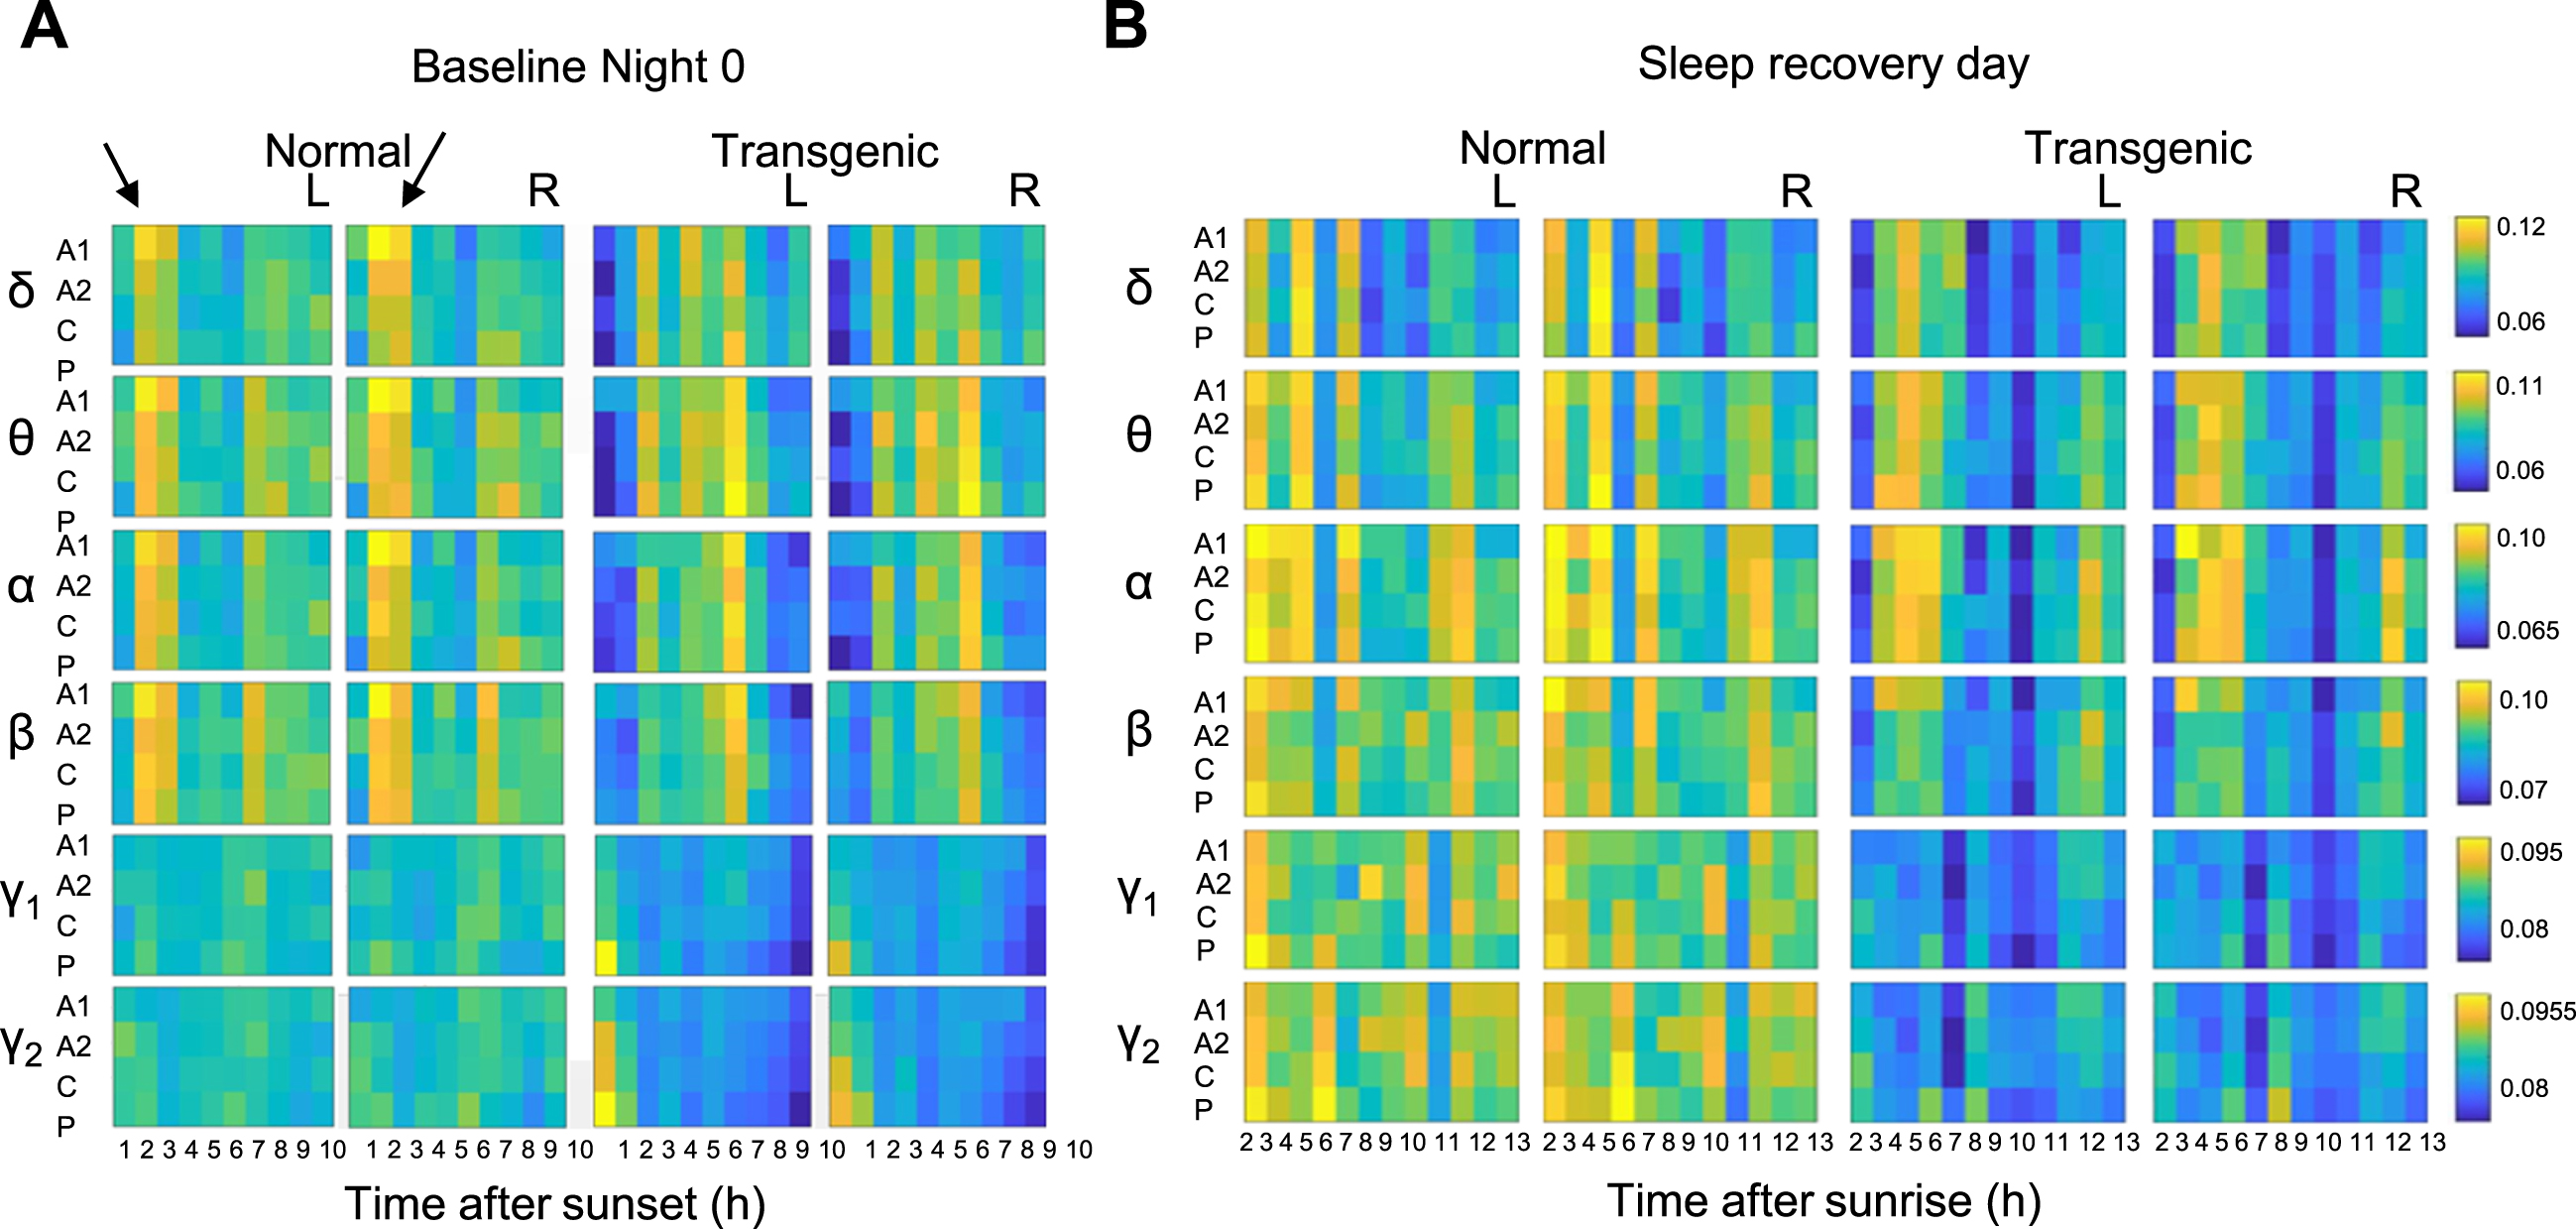 EEG powers during non-rapid eye movement sleep are different in transgenic and normal sheep under baseline conditions and after sleep deprivation. Heatmaps show the relative distribution of EEG powers in different frequency ranges denoted by Greek letters (δ, delta [0.5–4 Hz]; θ, theta [4–9 Hz]; α, alpha [9–14 Hz]; β, beta [14–35 Hz]; γ1, low-gamma [35–55 Hz]; γ2, high-gamma [55–120 Hz]) during an undisturbed light-off (Baseline Night 0; A) and on the day following a night of sleep deprivation (B) in transgenic and normal sheep. The arrows on A point to the period when the distribution of EEG powers show striking difference between normal and transgenic sheep at night. Color scales in each frequency range show the mean normalized EEG power values (per channel, per hour). For full results and experimental details see [63]. L and R = left or right hemisphere respectively. This figure is an adapted version of Figs. 5 and 7 in Vas et al. [63].